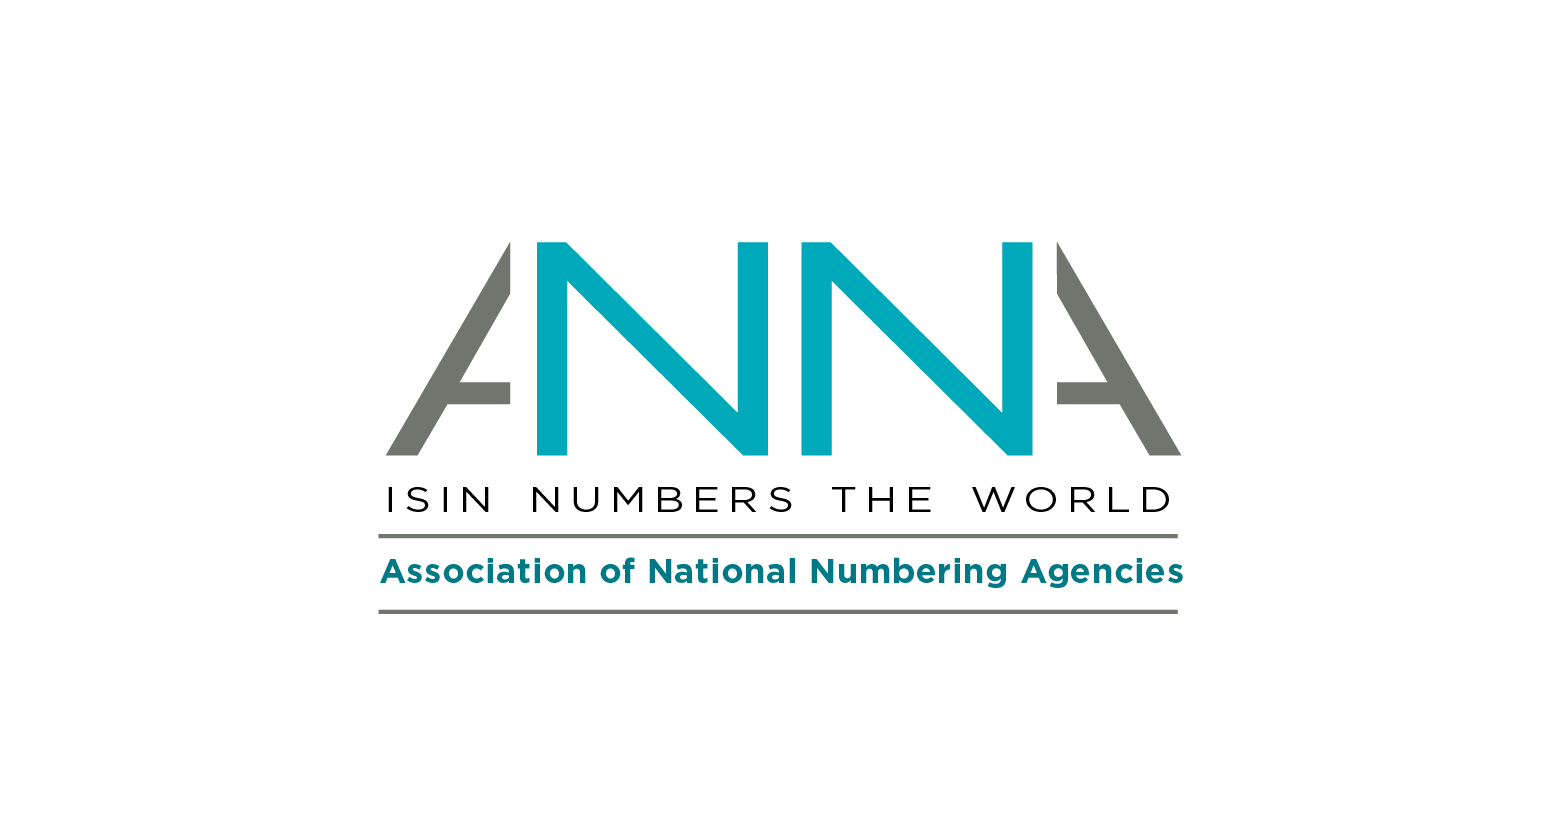 The Association of National Numbering Agencies Announces Timeline for Implementation of Revised Iso 6166 Isin Standard 